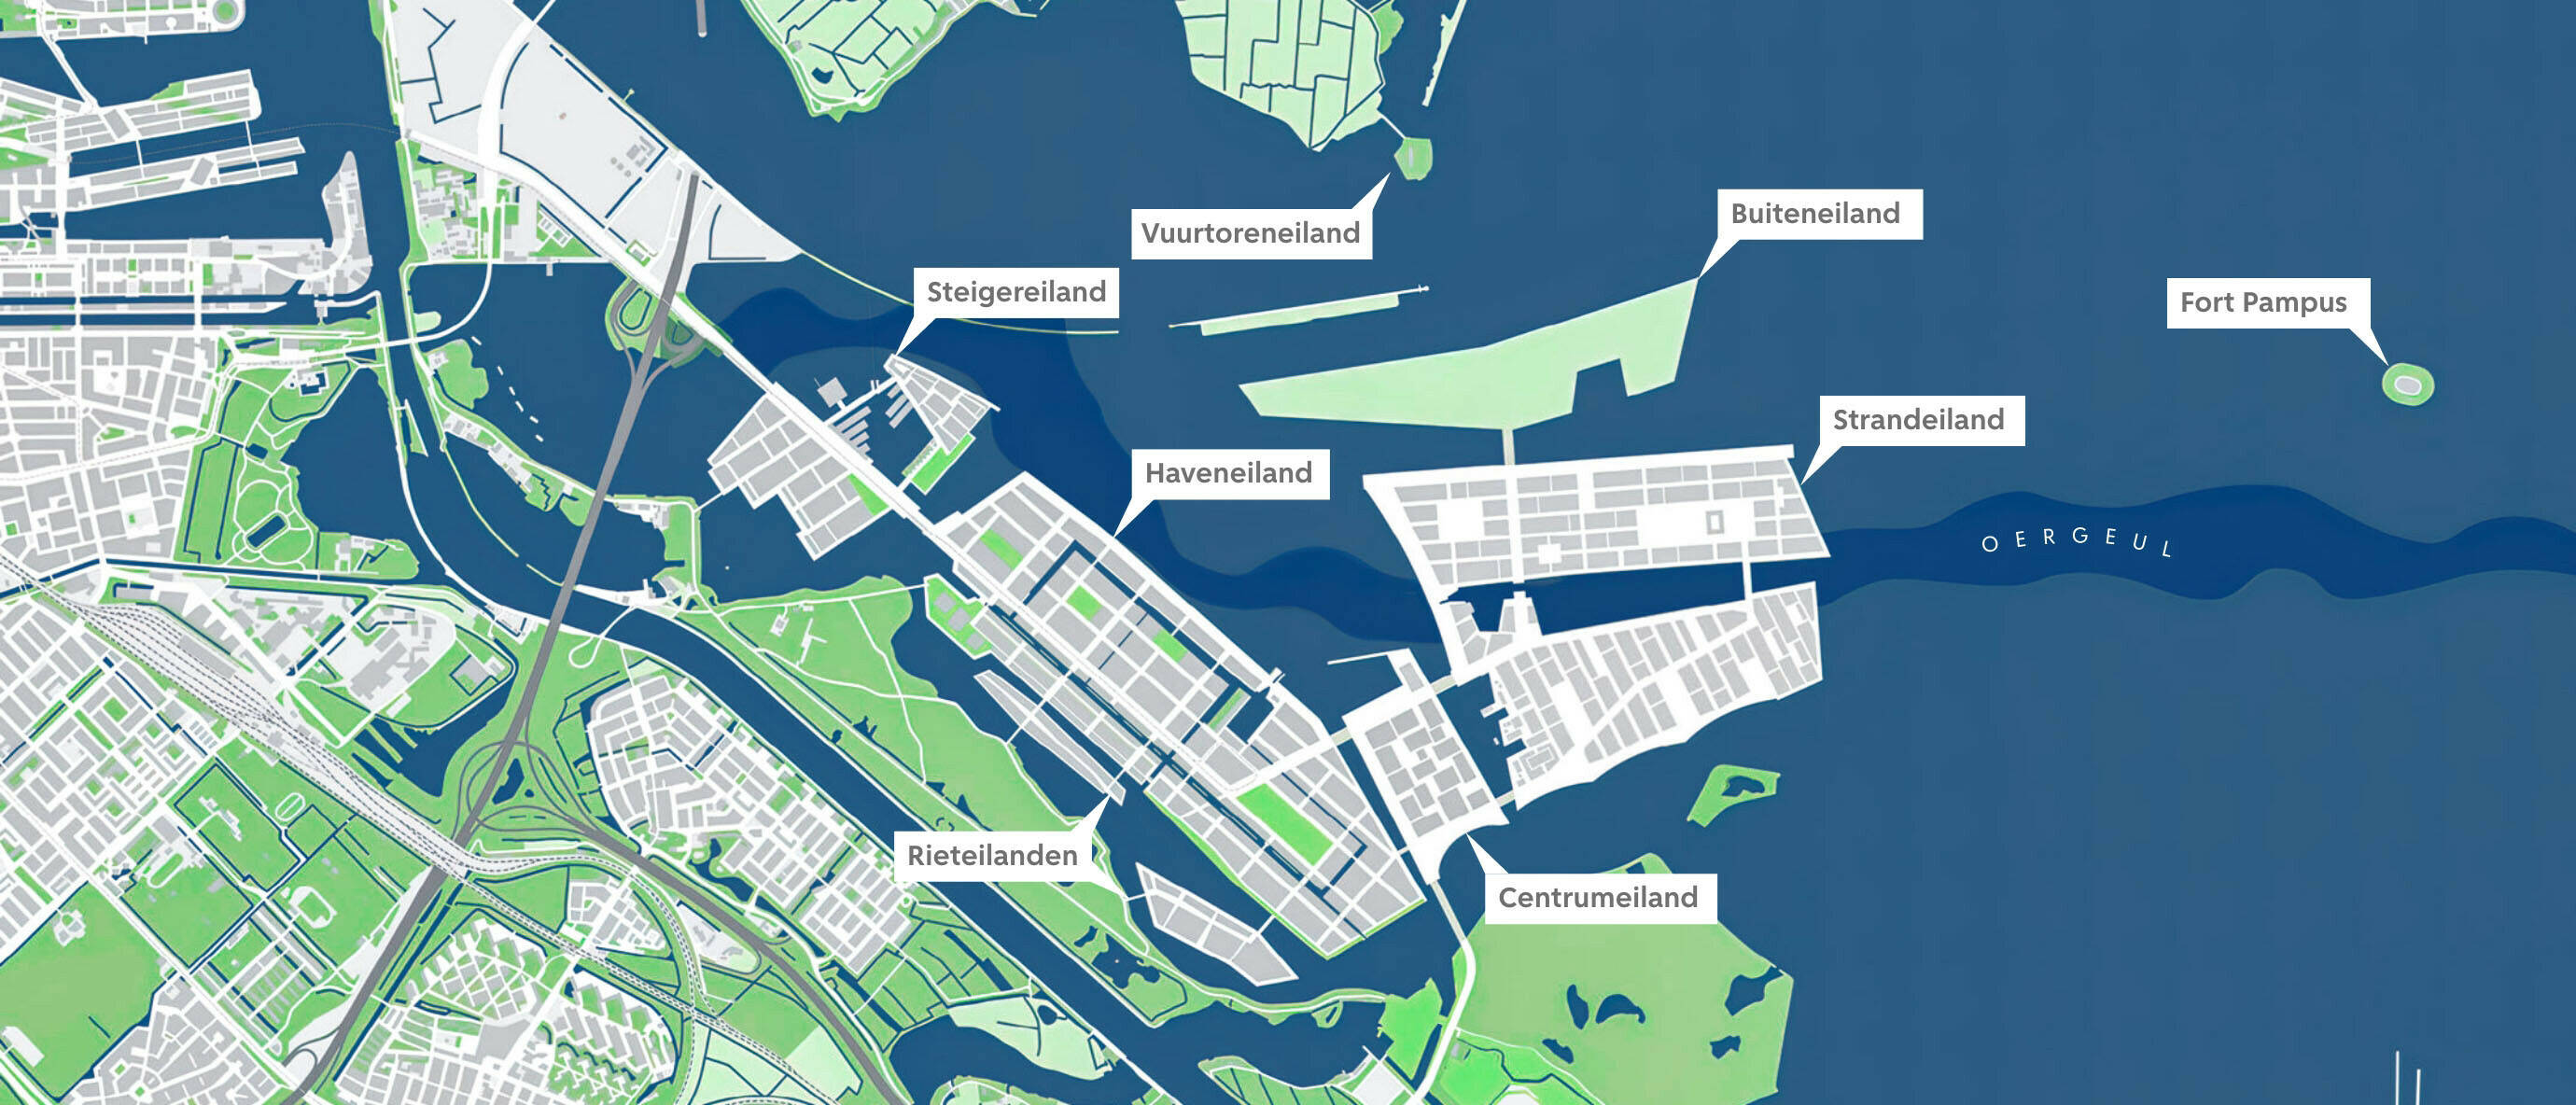 map of IJburg showing all islands